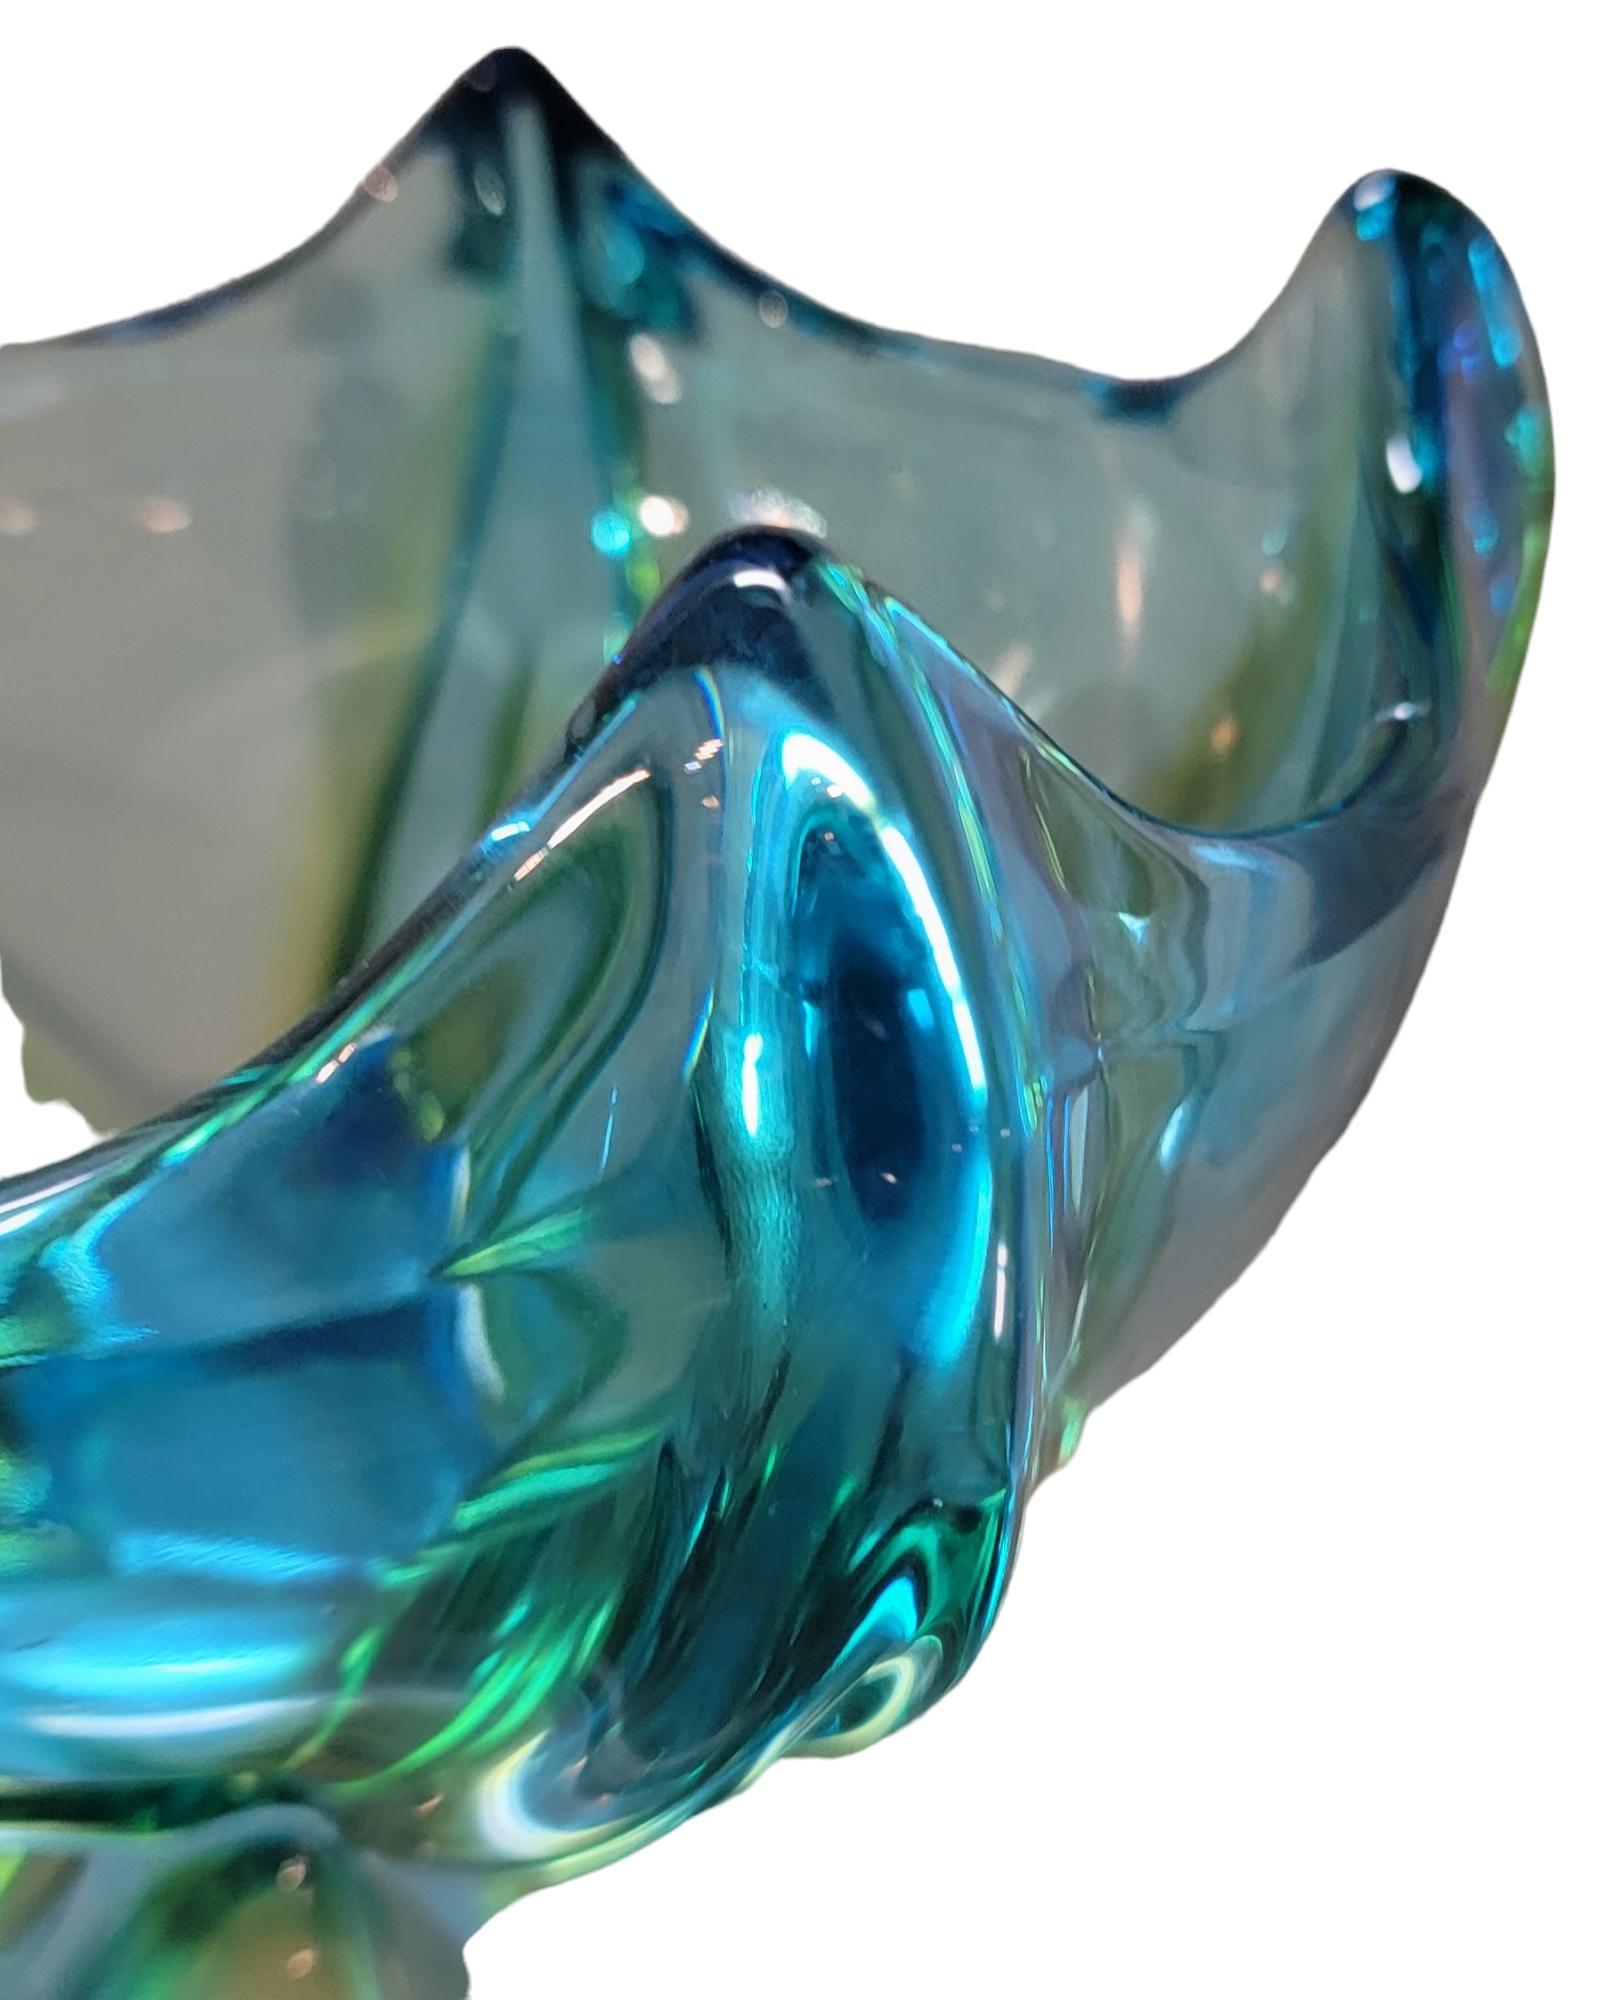 Mid Century Italian Murano Art Glass Bowl with great texture color and look. The Glass bowl has a wonderful starfish or floral design extending itself from the center to the edges of the bowl as to be resting over the curvature. Wonderful designer